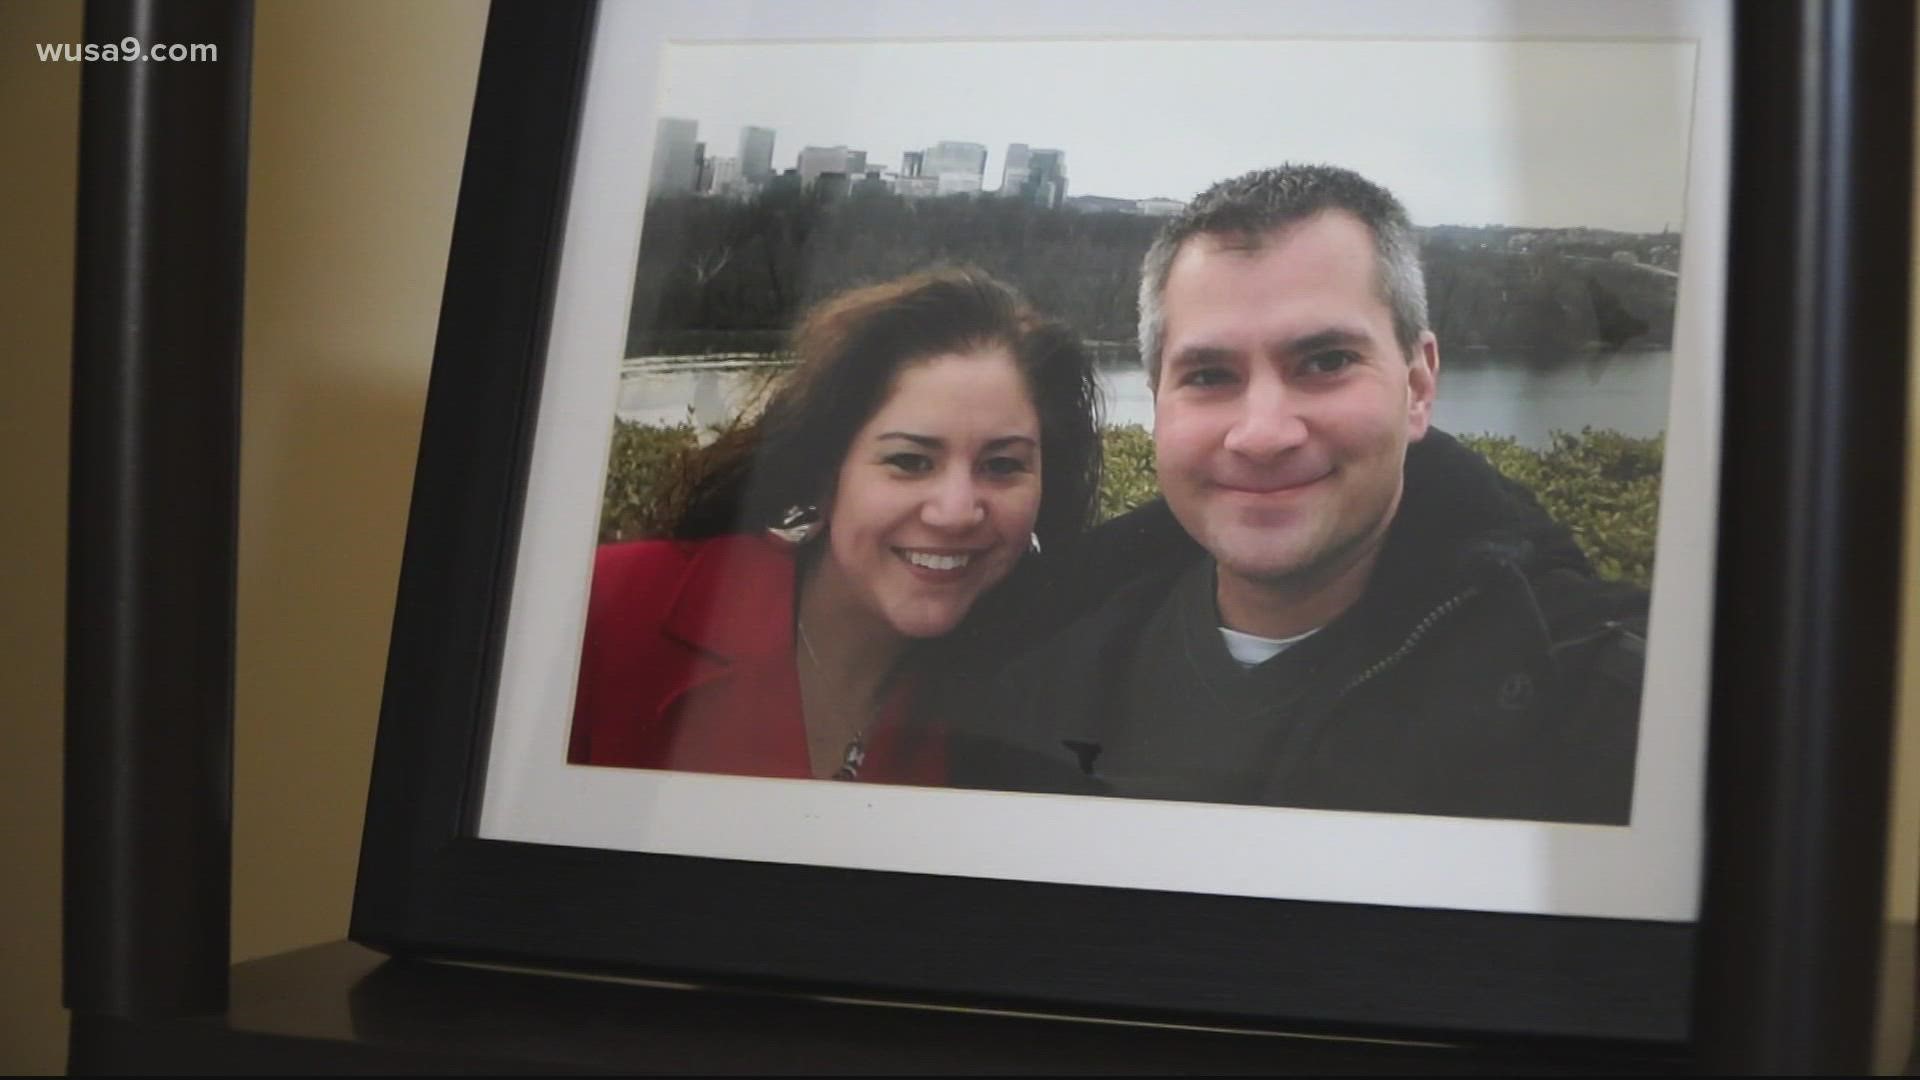 Few people knew U.S Capitol Police Officer Brian Sicknick like his partner of more than 11 years, Sandra Garza.